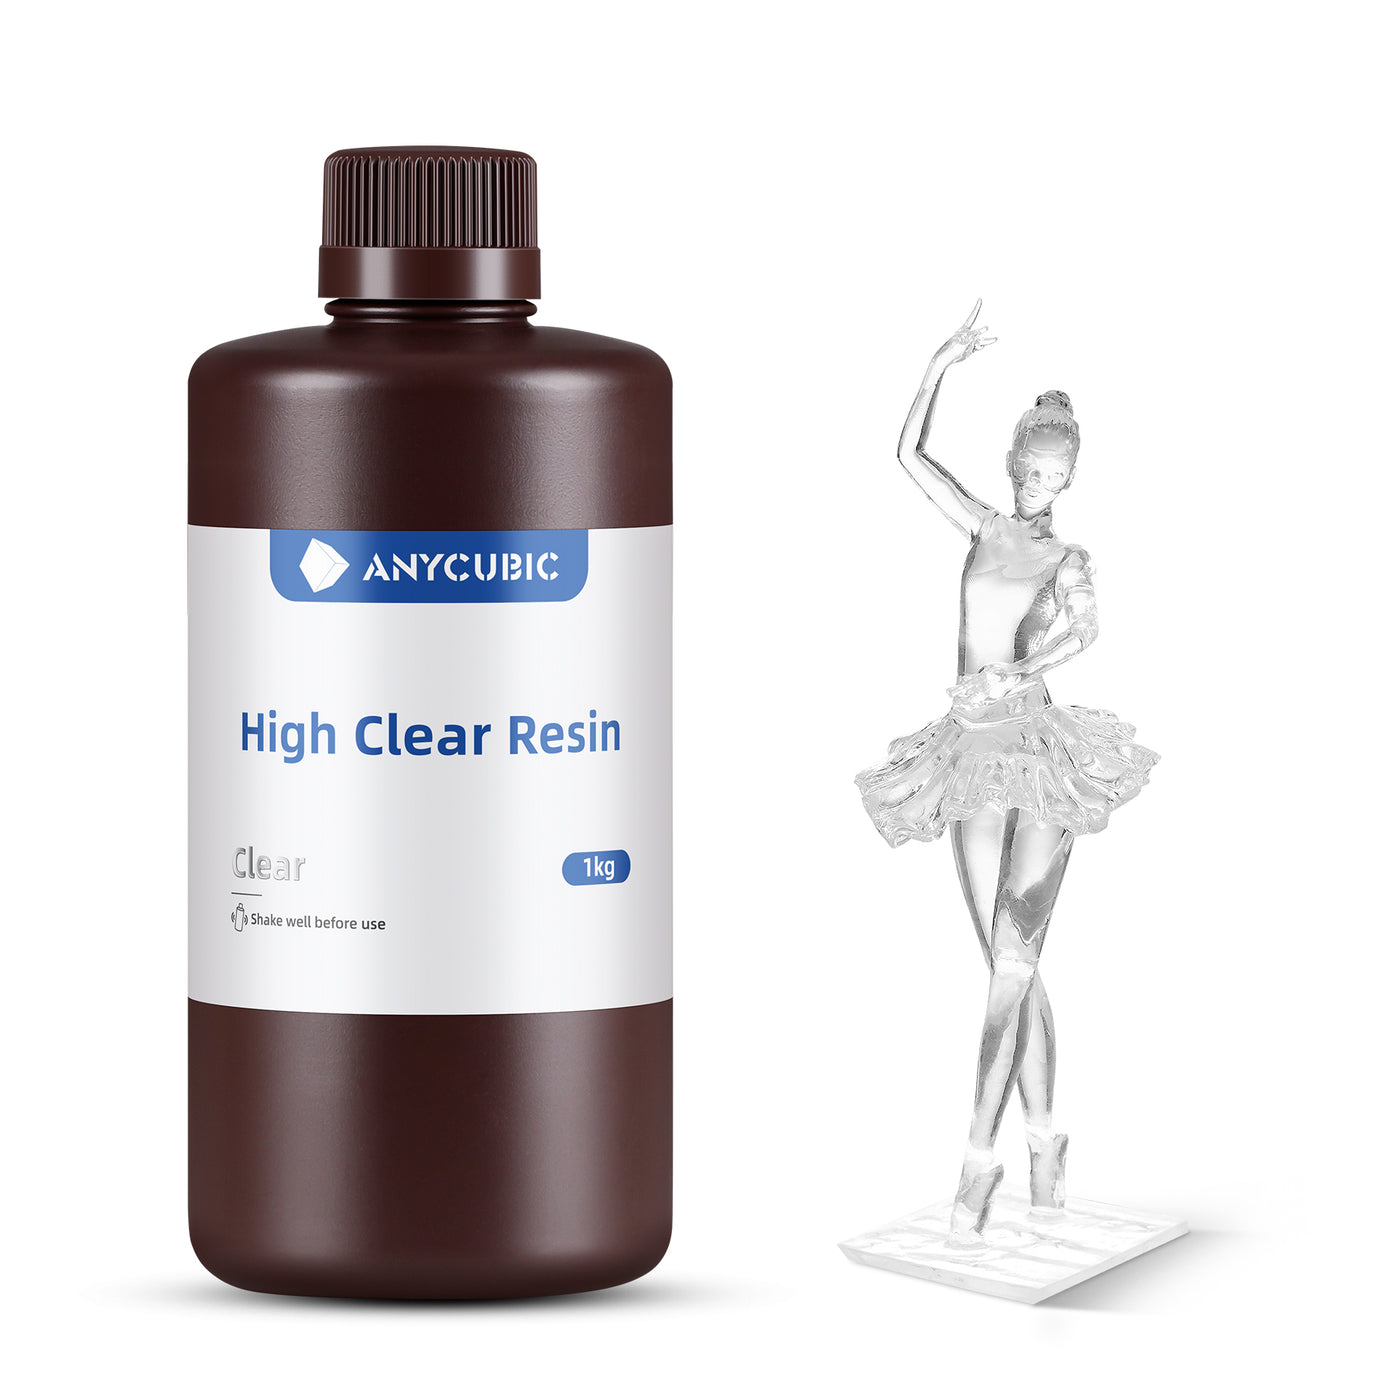 High Clear Resin - Get 3 for the Price of 2